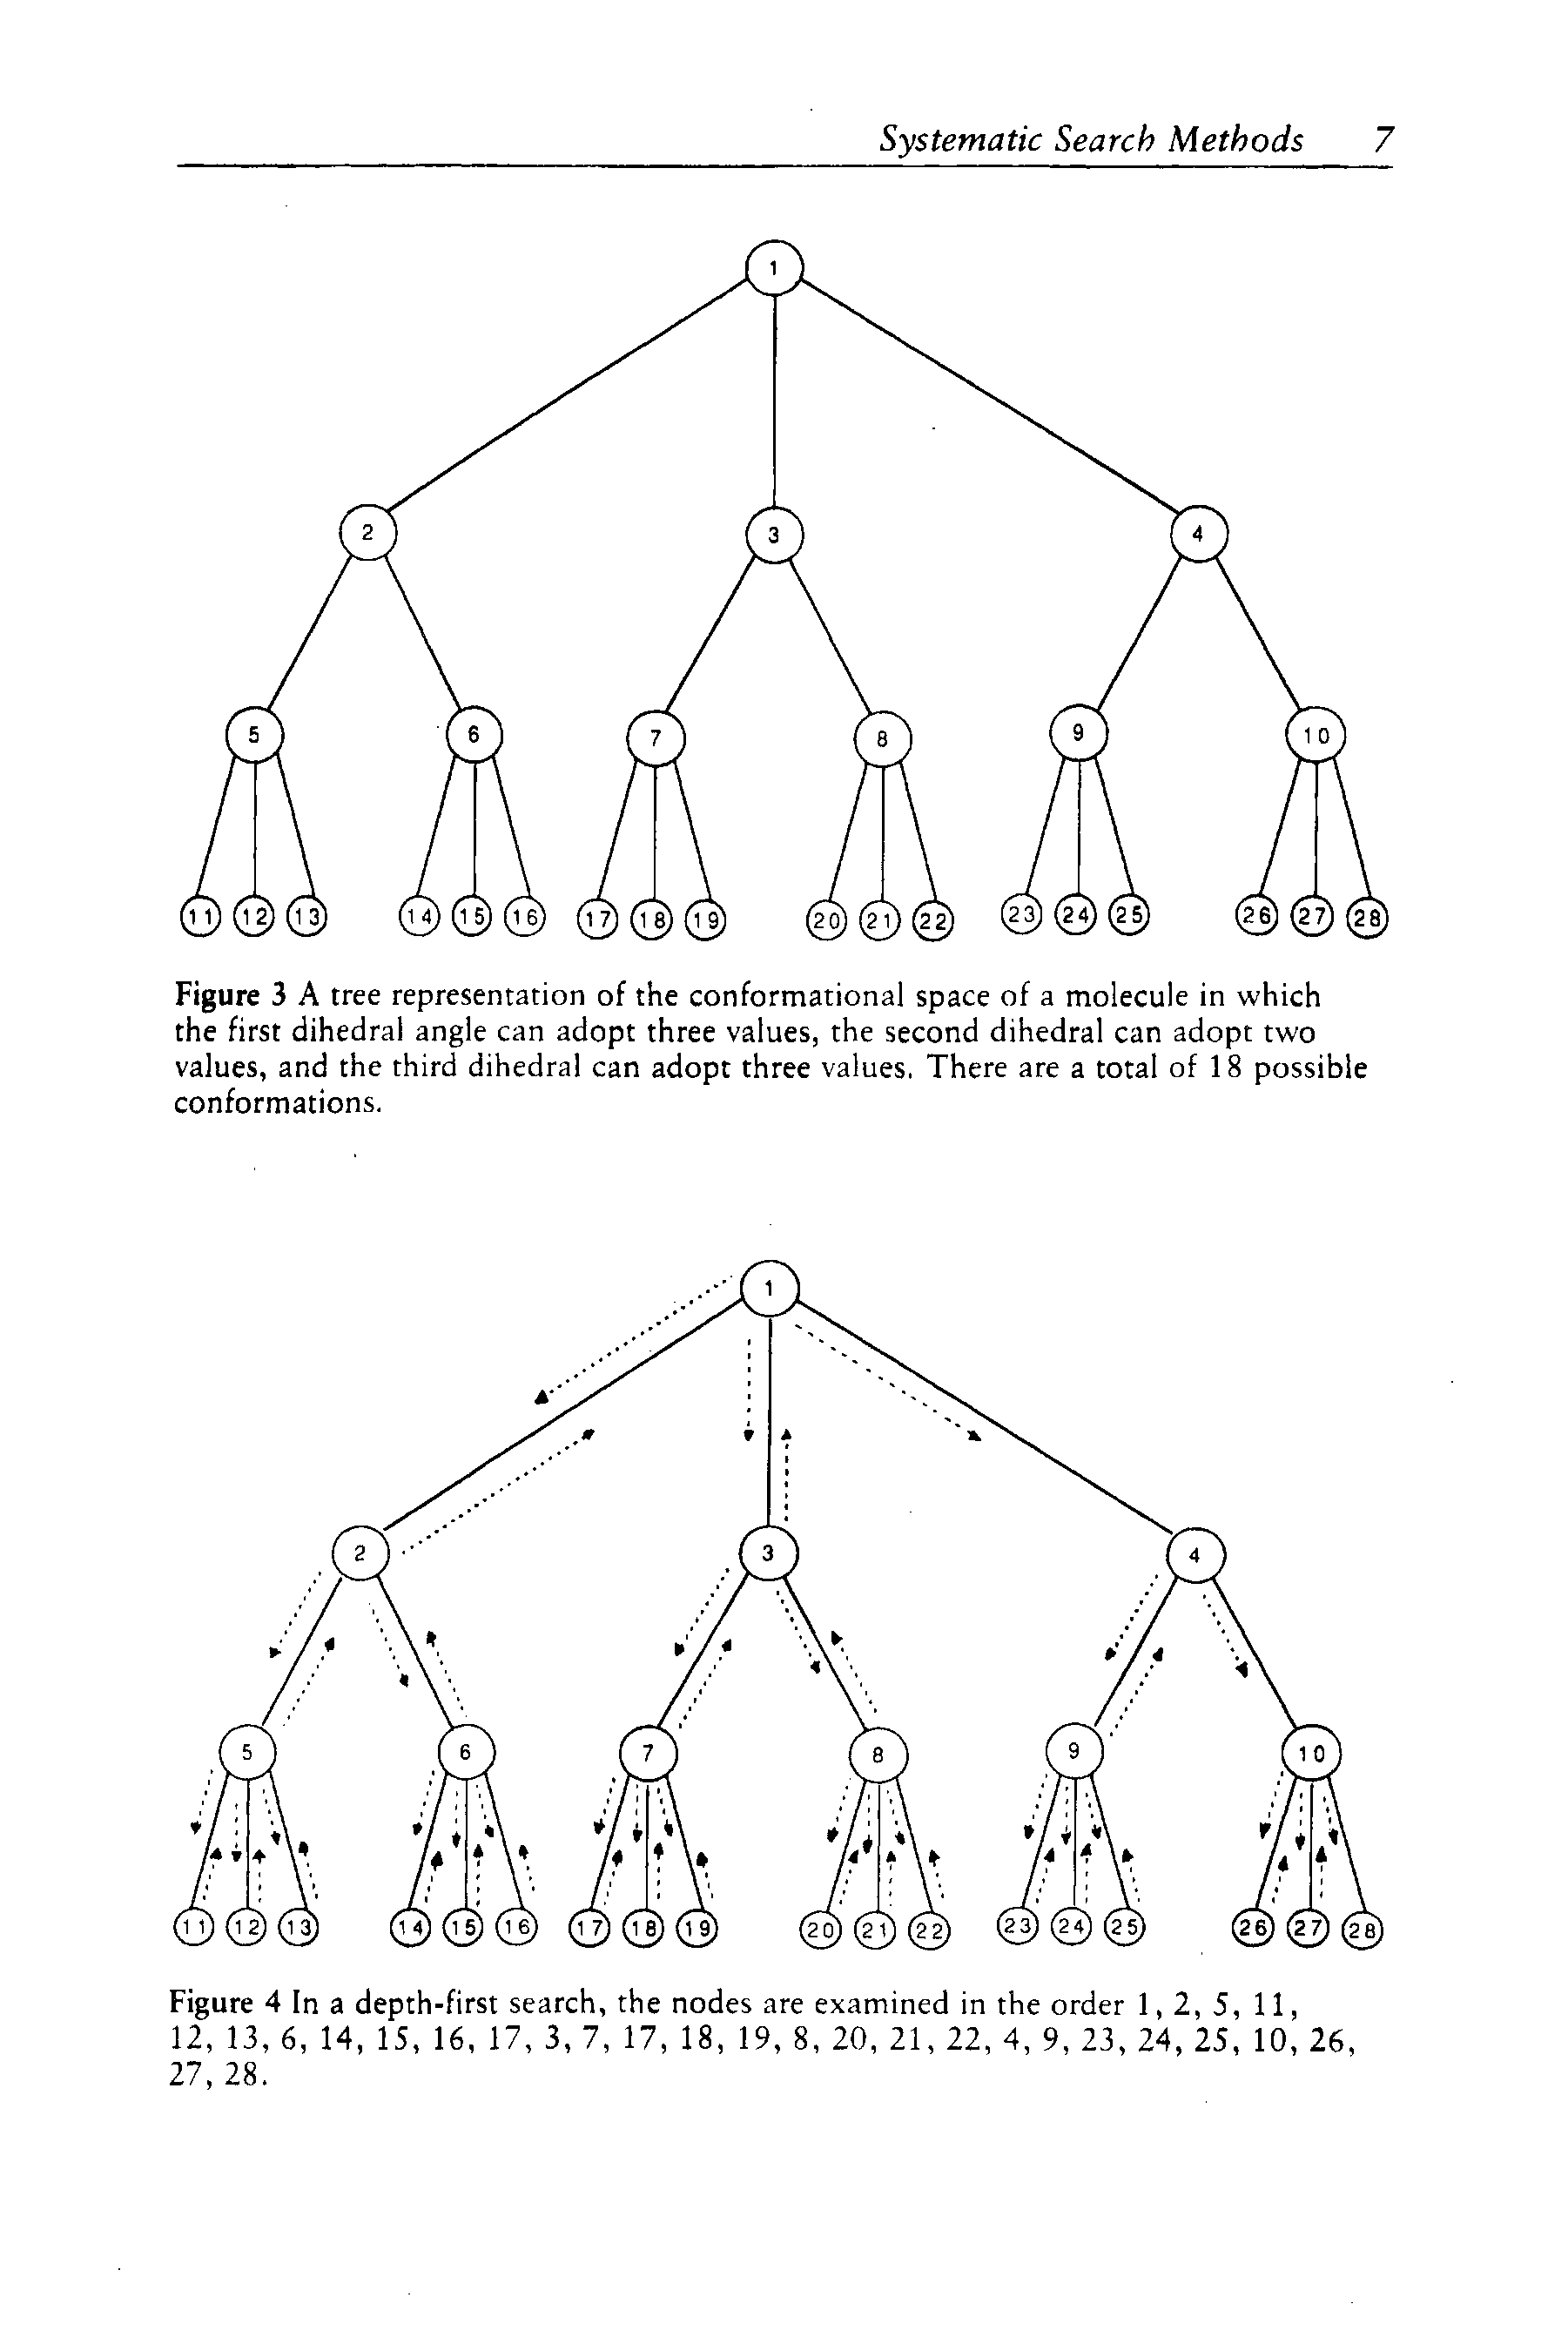 Figure 3 A tree representation of the conformational space of a molecule in which the first dihedral angle can adopt three values, the second dihedral can adopt two values, and the third dihedral can adopt three values. There are a total of 18 possible conformations.